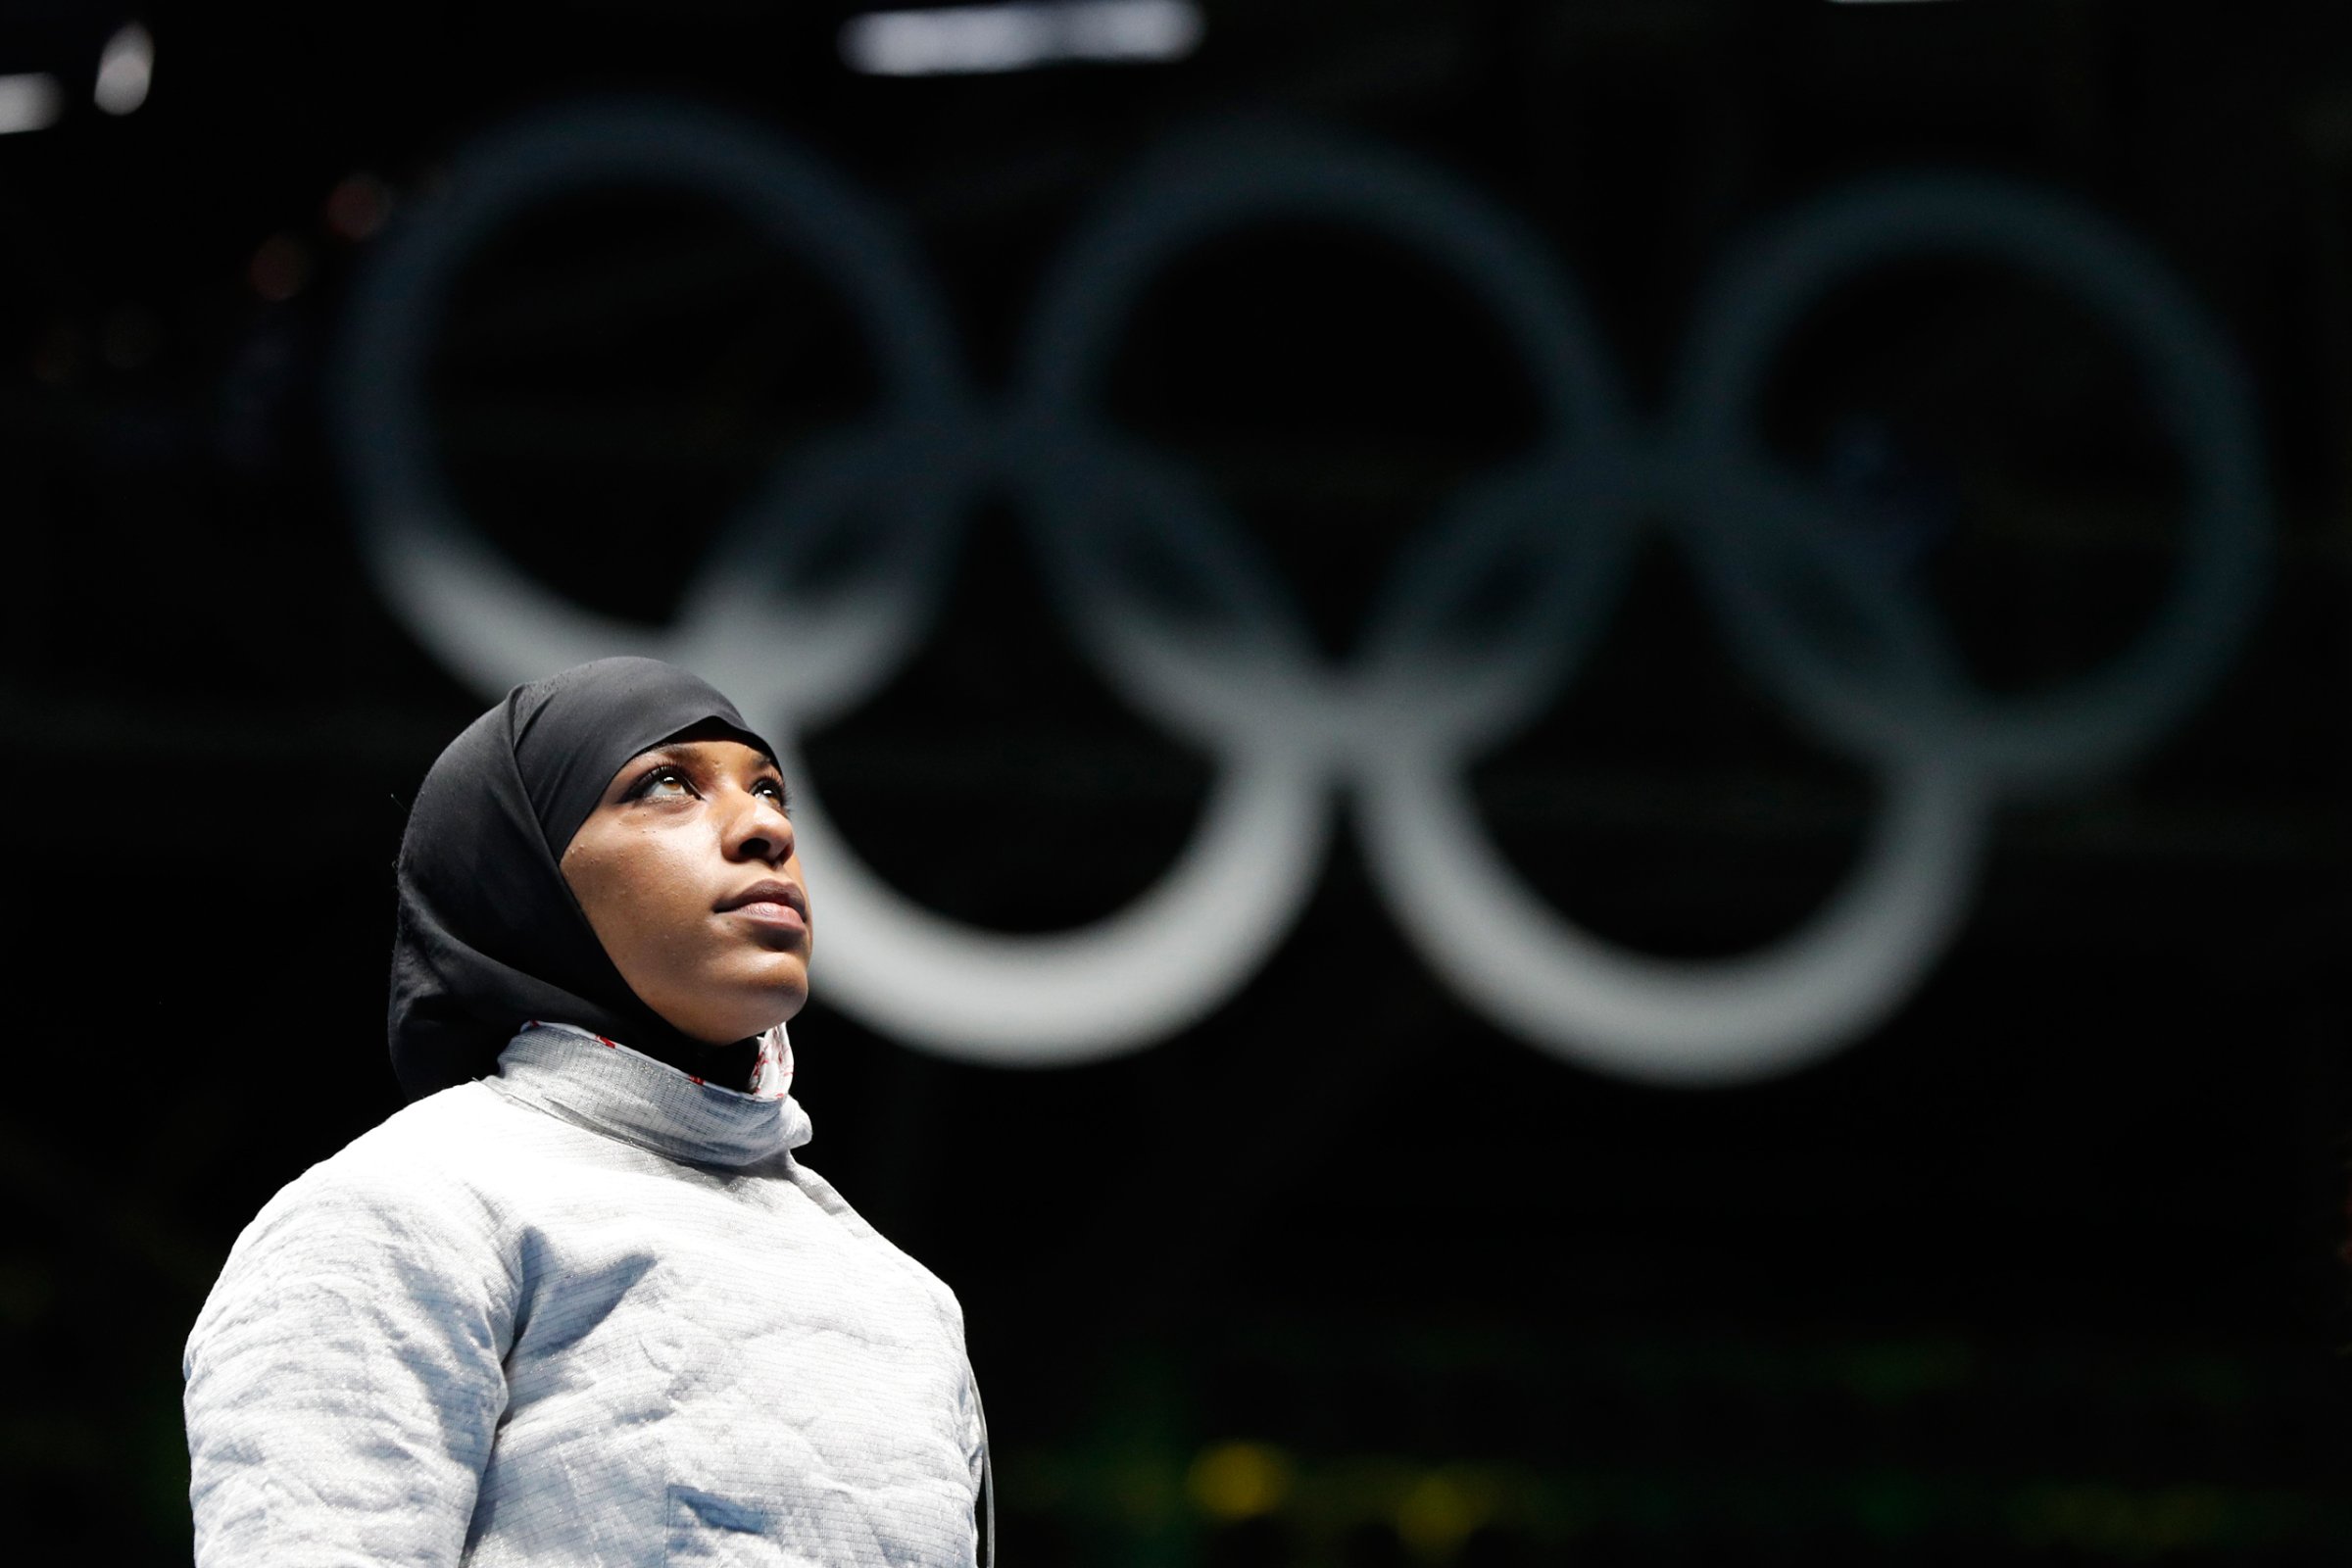 CORRECTS FIRST NAME TO IBTIHAJ FROM UBRIHAJ - Ibtihaj Muhammad, from United States, waits for match against Olena Kravatska from Ukraine, in the women's saber individual fencing event at the 2016 Summer Olympics in Rio de Janeiro, Brazil, Monday, Aug. 8, 2016. (AP Photo/Vincent Thian)